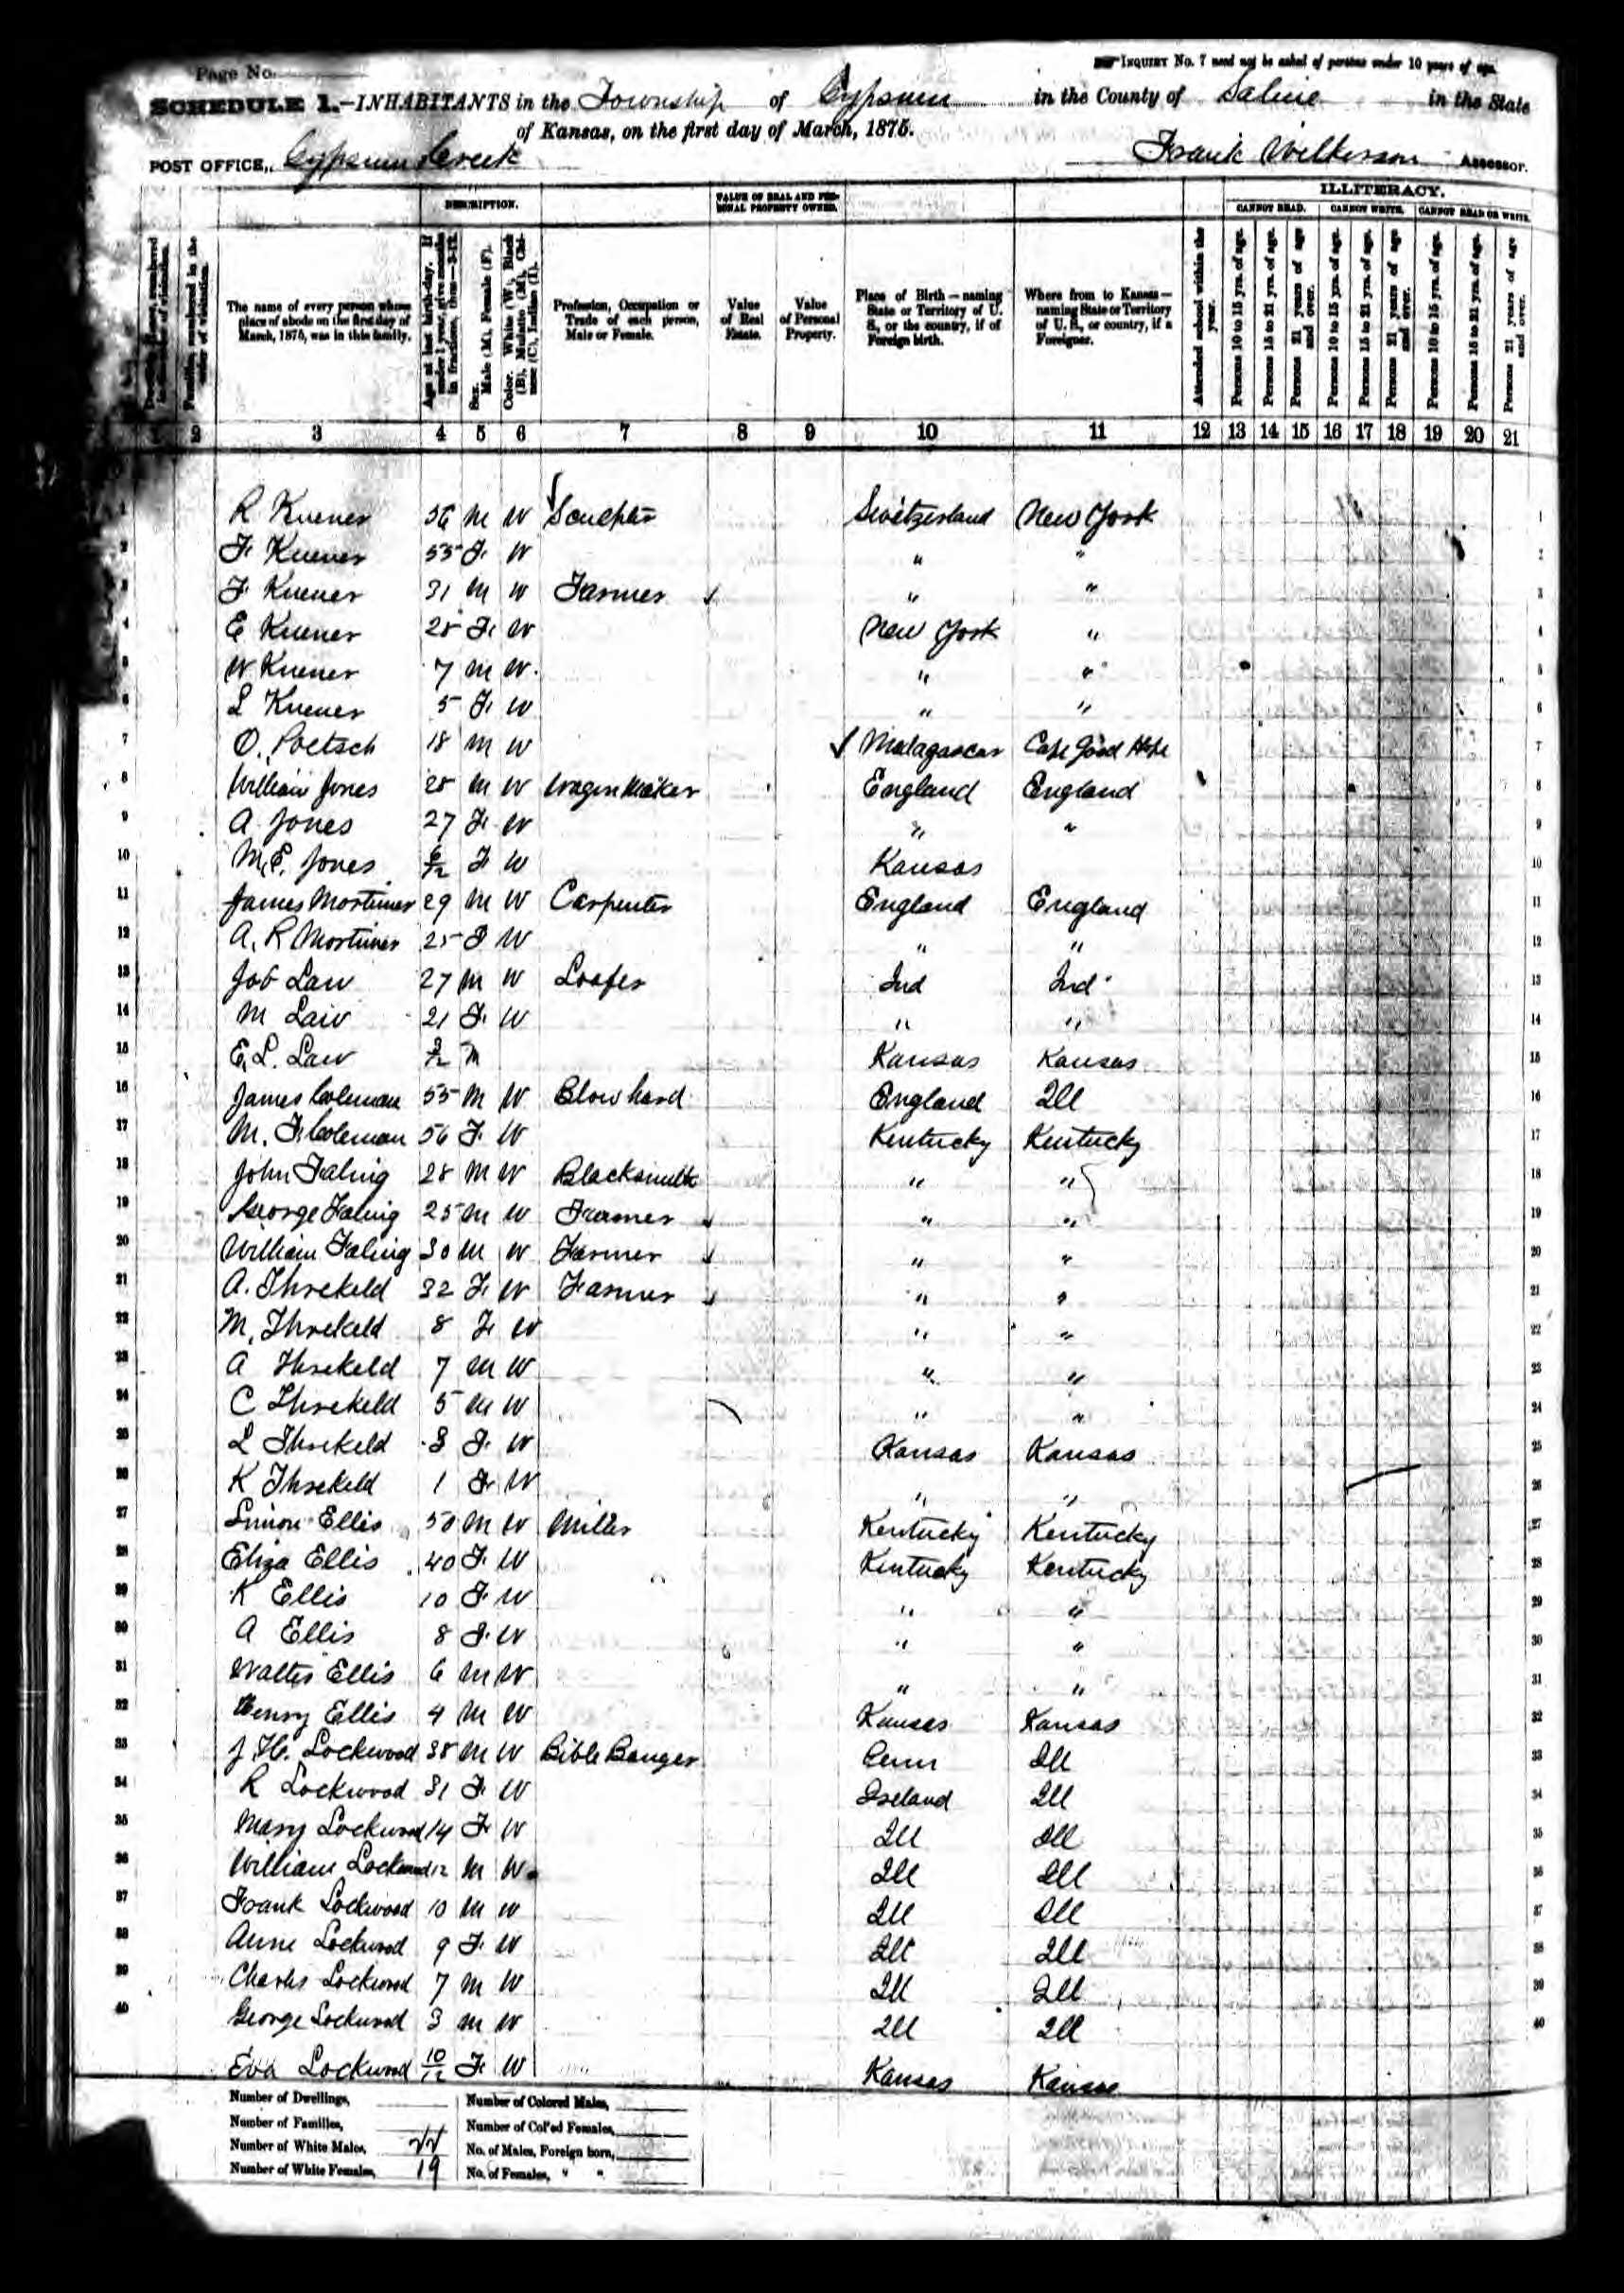 See what this intriguing census taker had to say about the neighbors